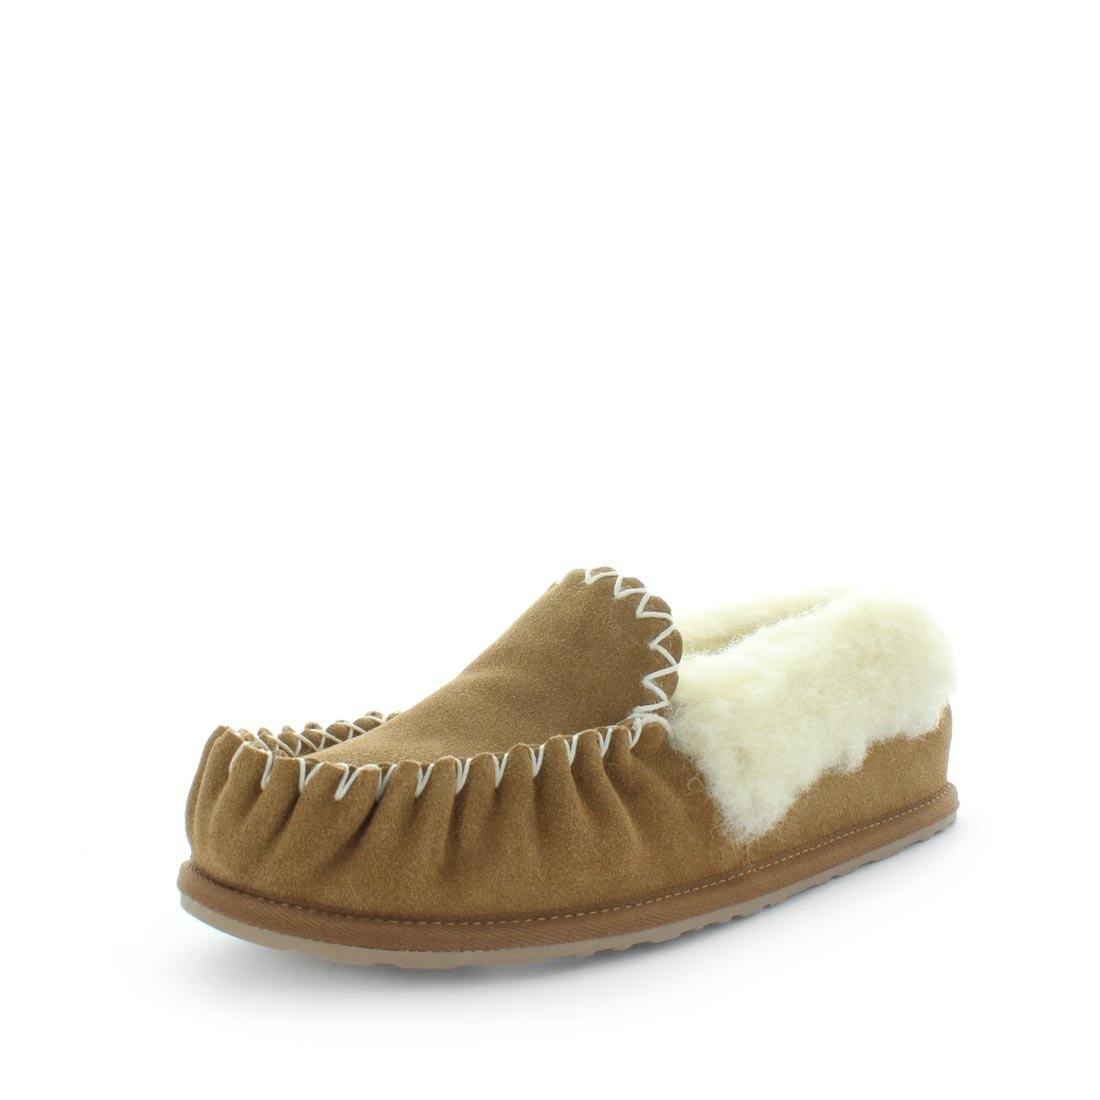 Load image into Gallery viewer, Mens slipper chums by just bee uggs, uggs boots - just bee slippers - mens slippers, moccasin slippers, wool slippers, 100% wool slippers.
